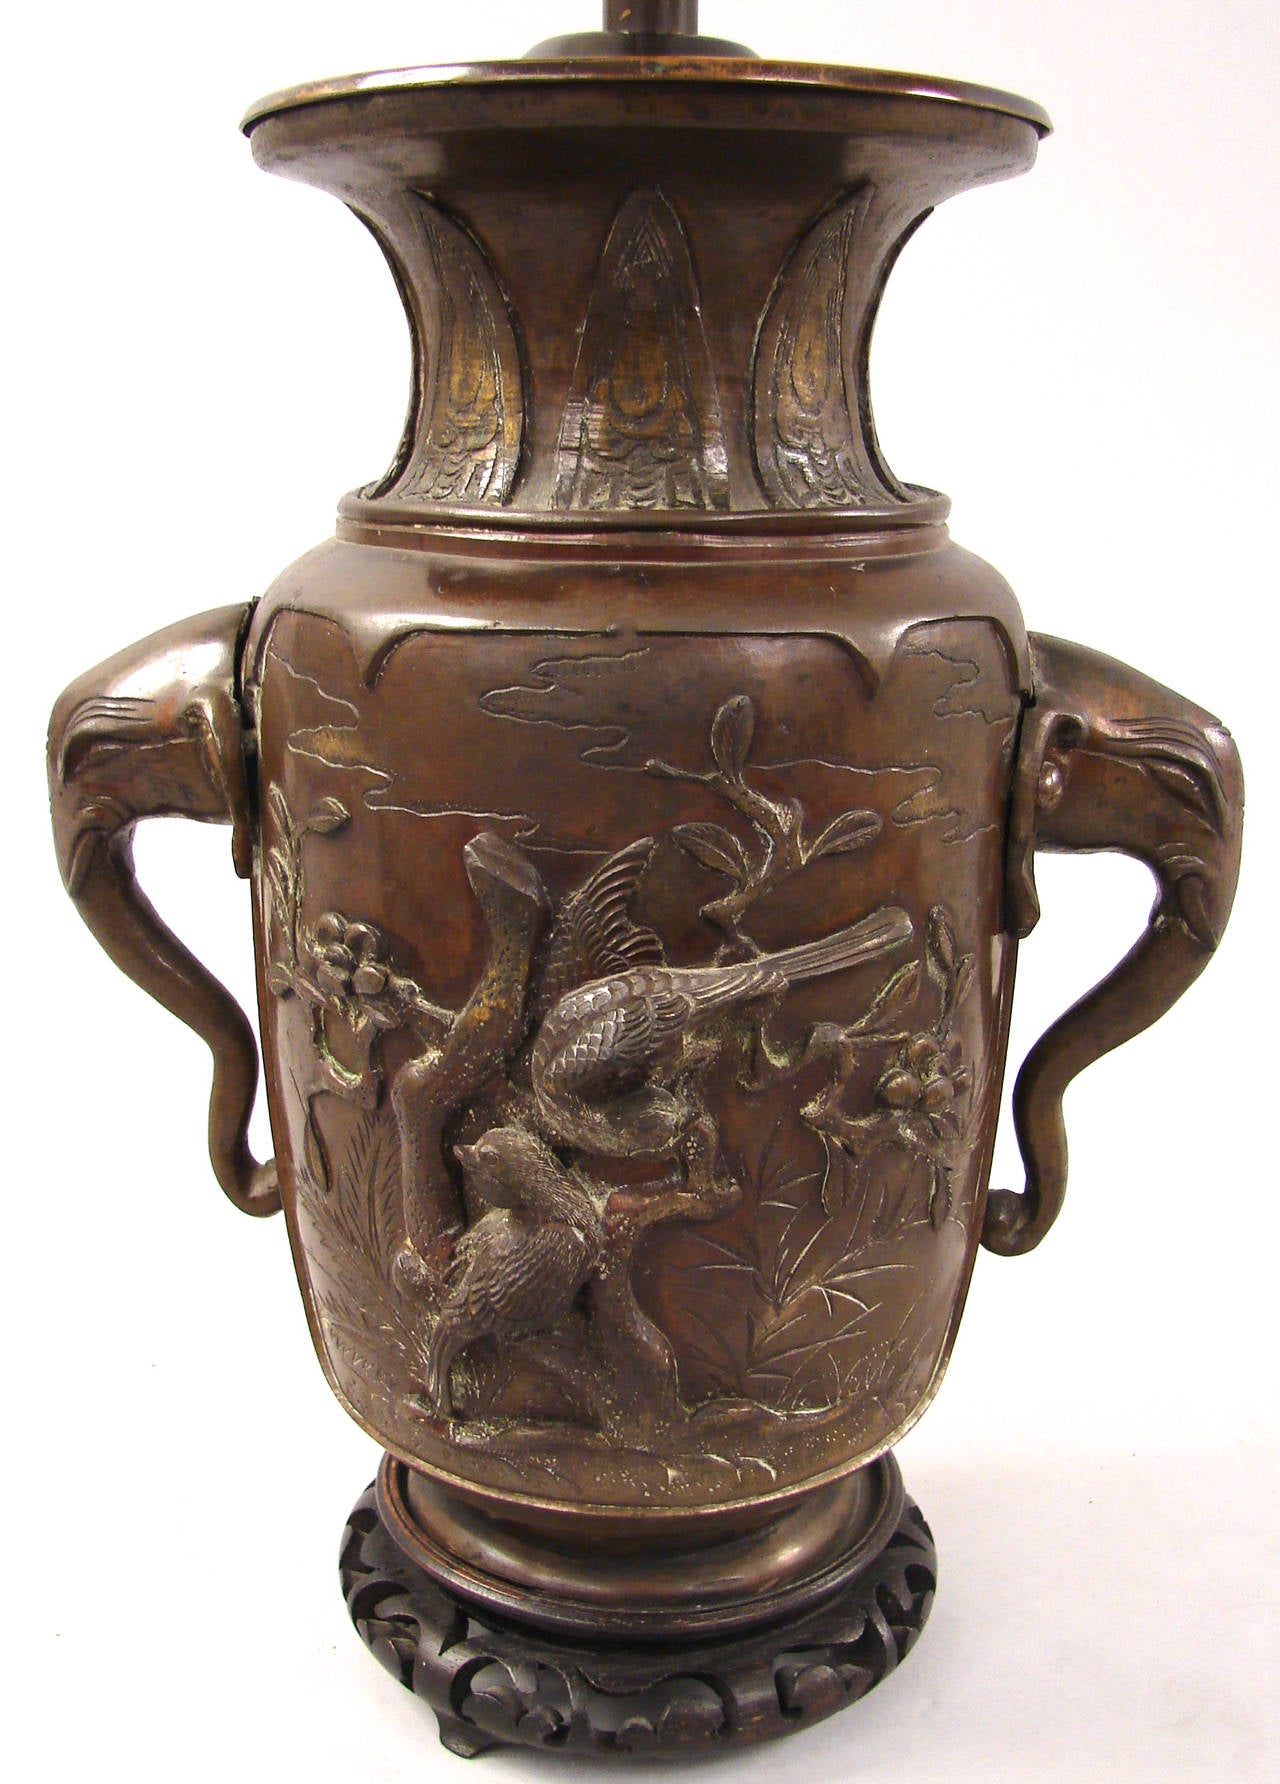 A Japanese bronze of the late Meiji period with elephant head handles and cast birds and flowers in relief. Now electrified and mounted as a lamp. Vase circa 1880-1900.